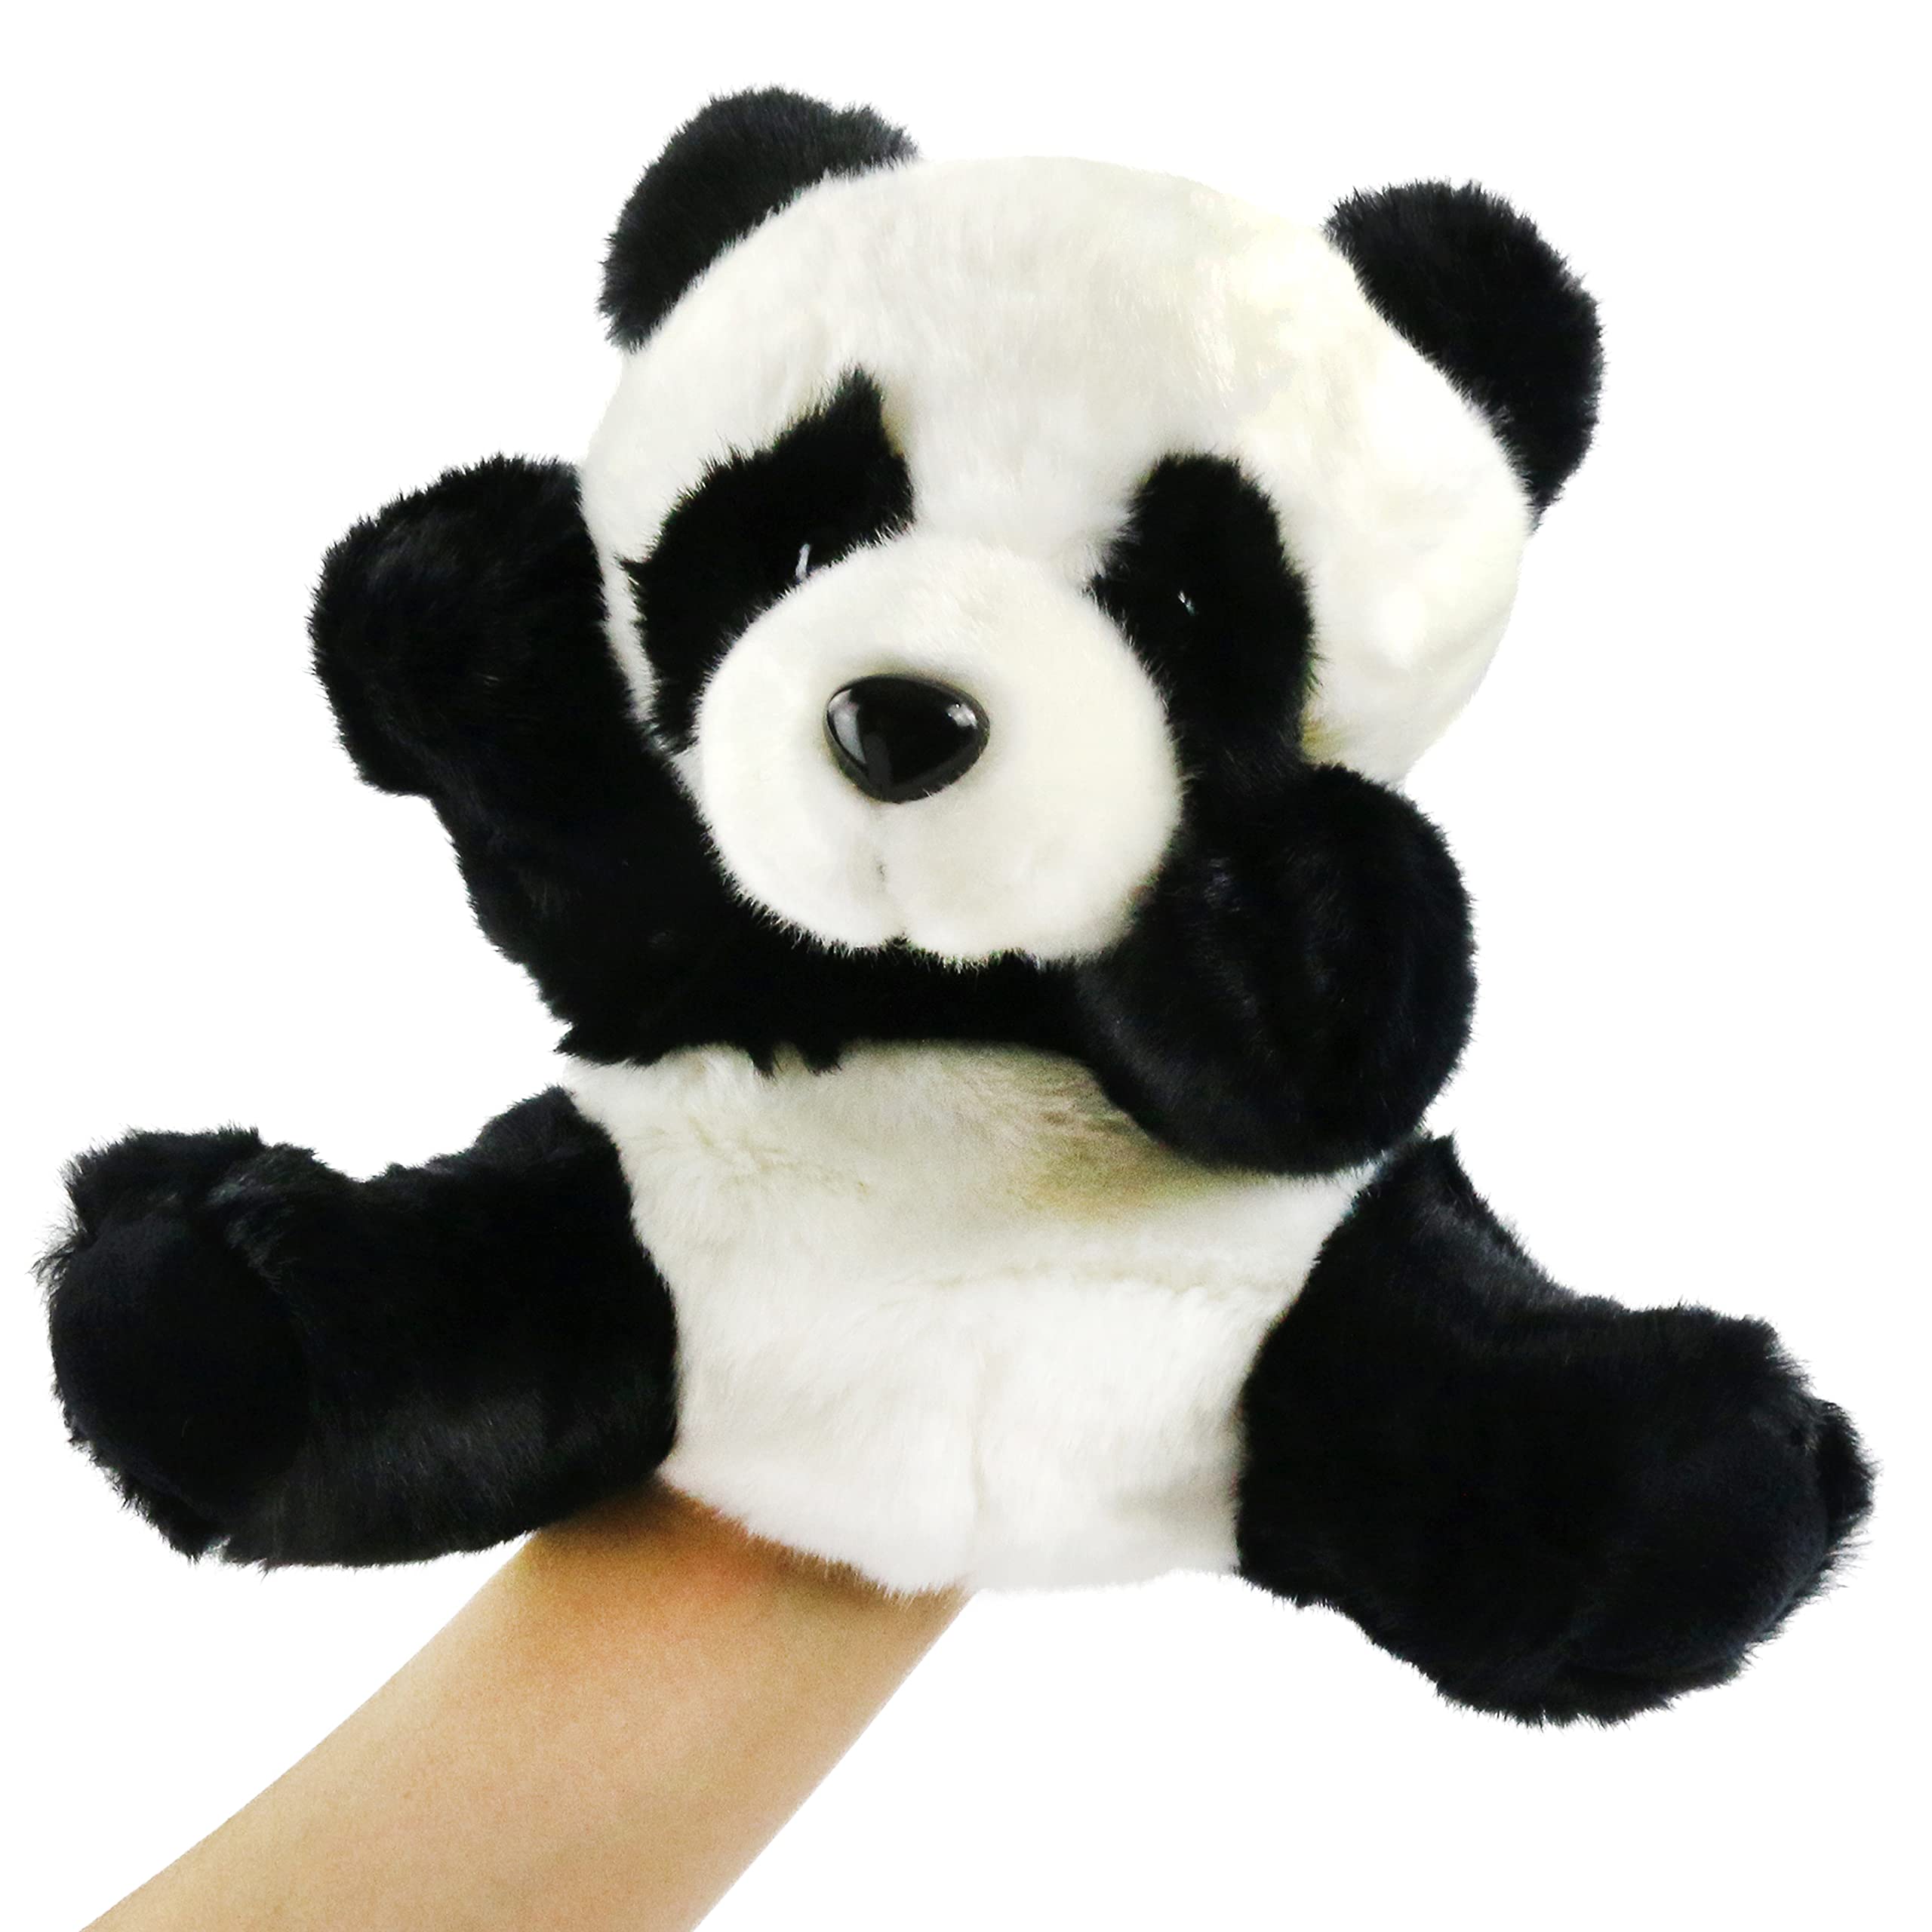 Specialyou Panda Hand Puppet Jungle Friends Plush Animals Toy for Imaginative Play, Storytelling, Teaching, Preschool & Role-Pla